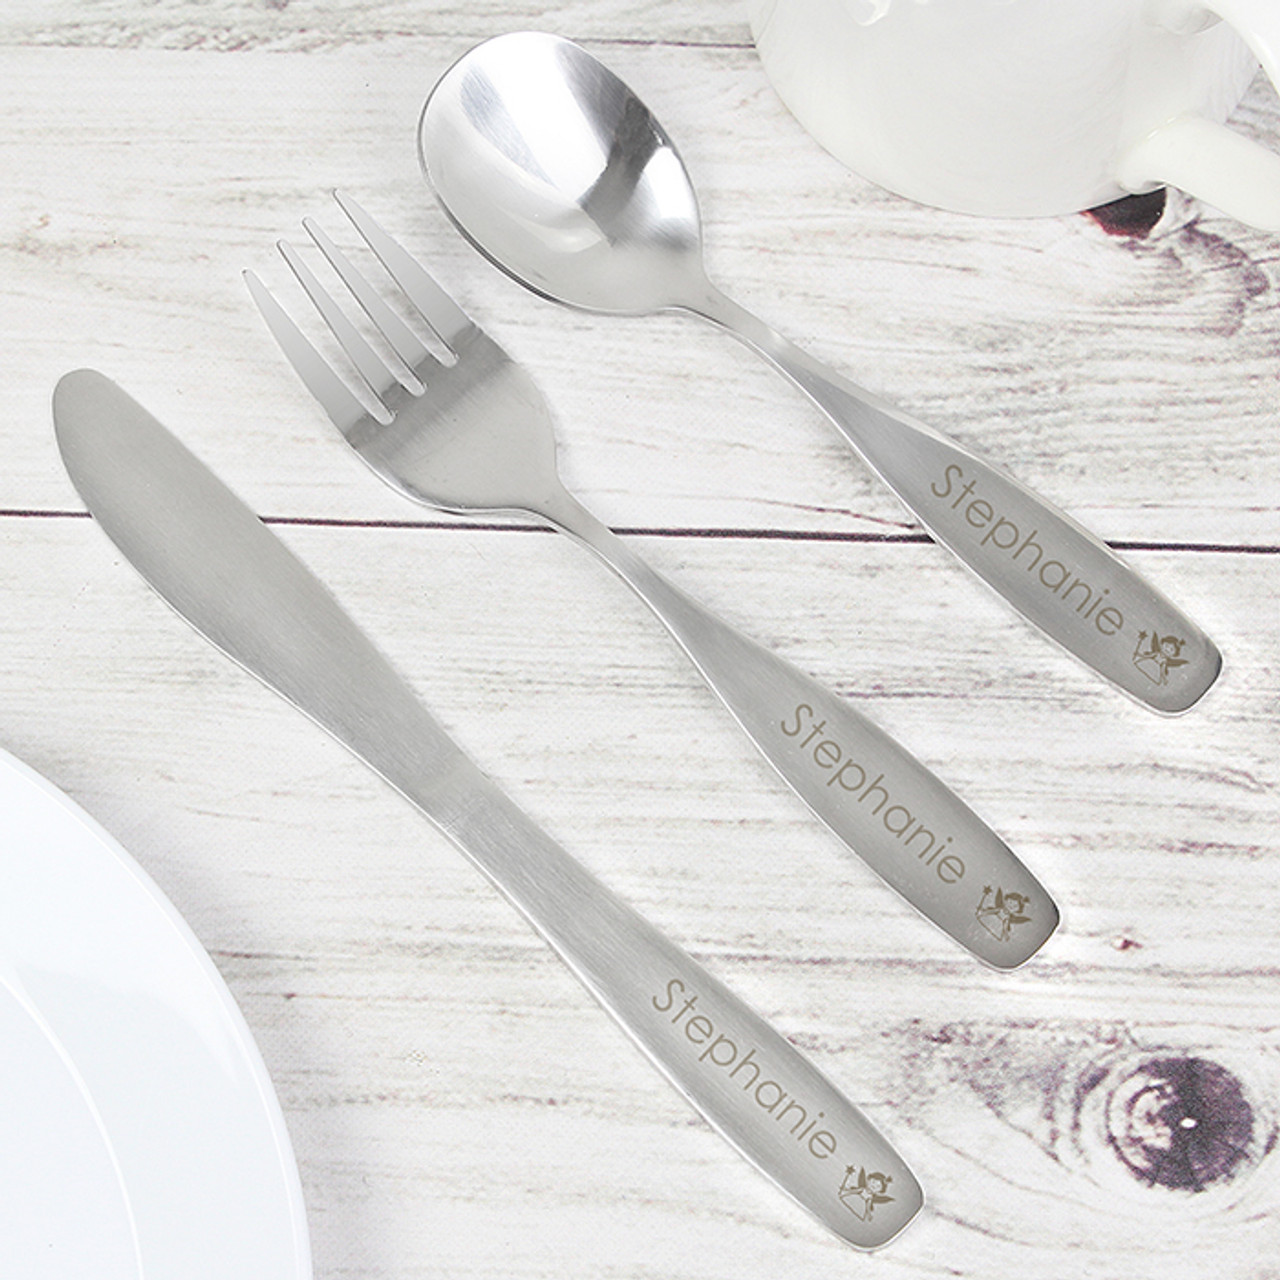 https://cdn11.bigcommerce.com/s-mk8mgl5/images/stencil/1280x1280/products/416/6639/Fairy_Cutlery_2__14766.1527785504.jpg?c=2